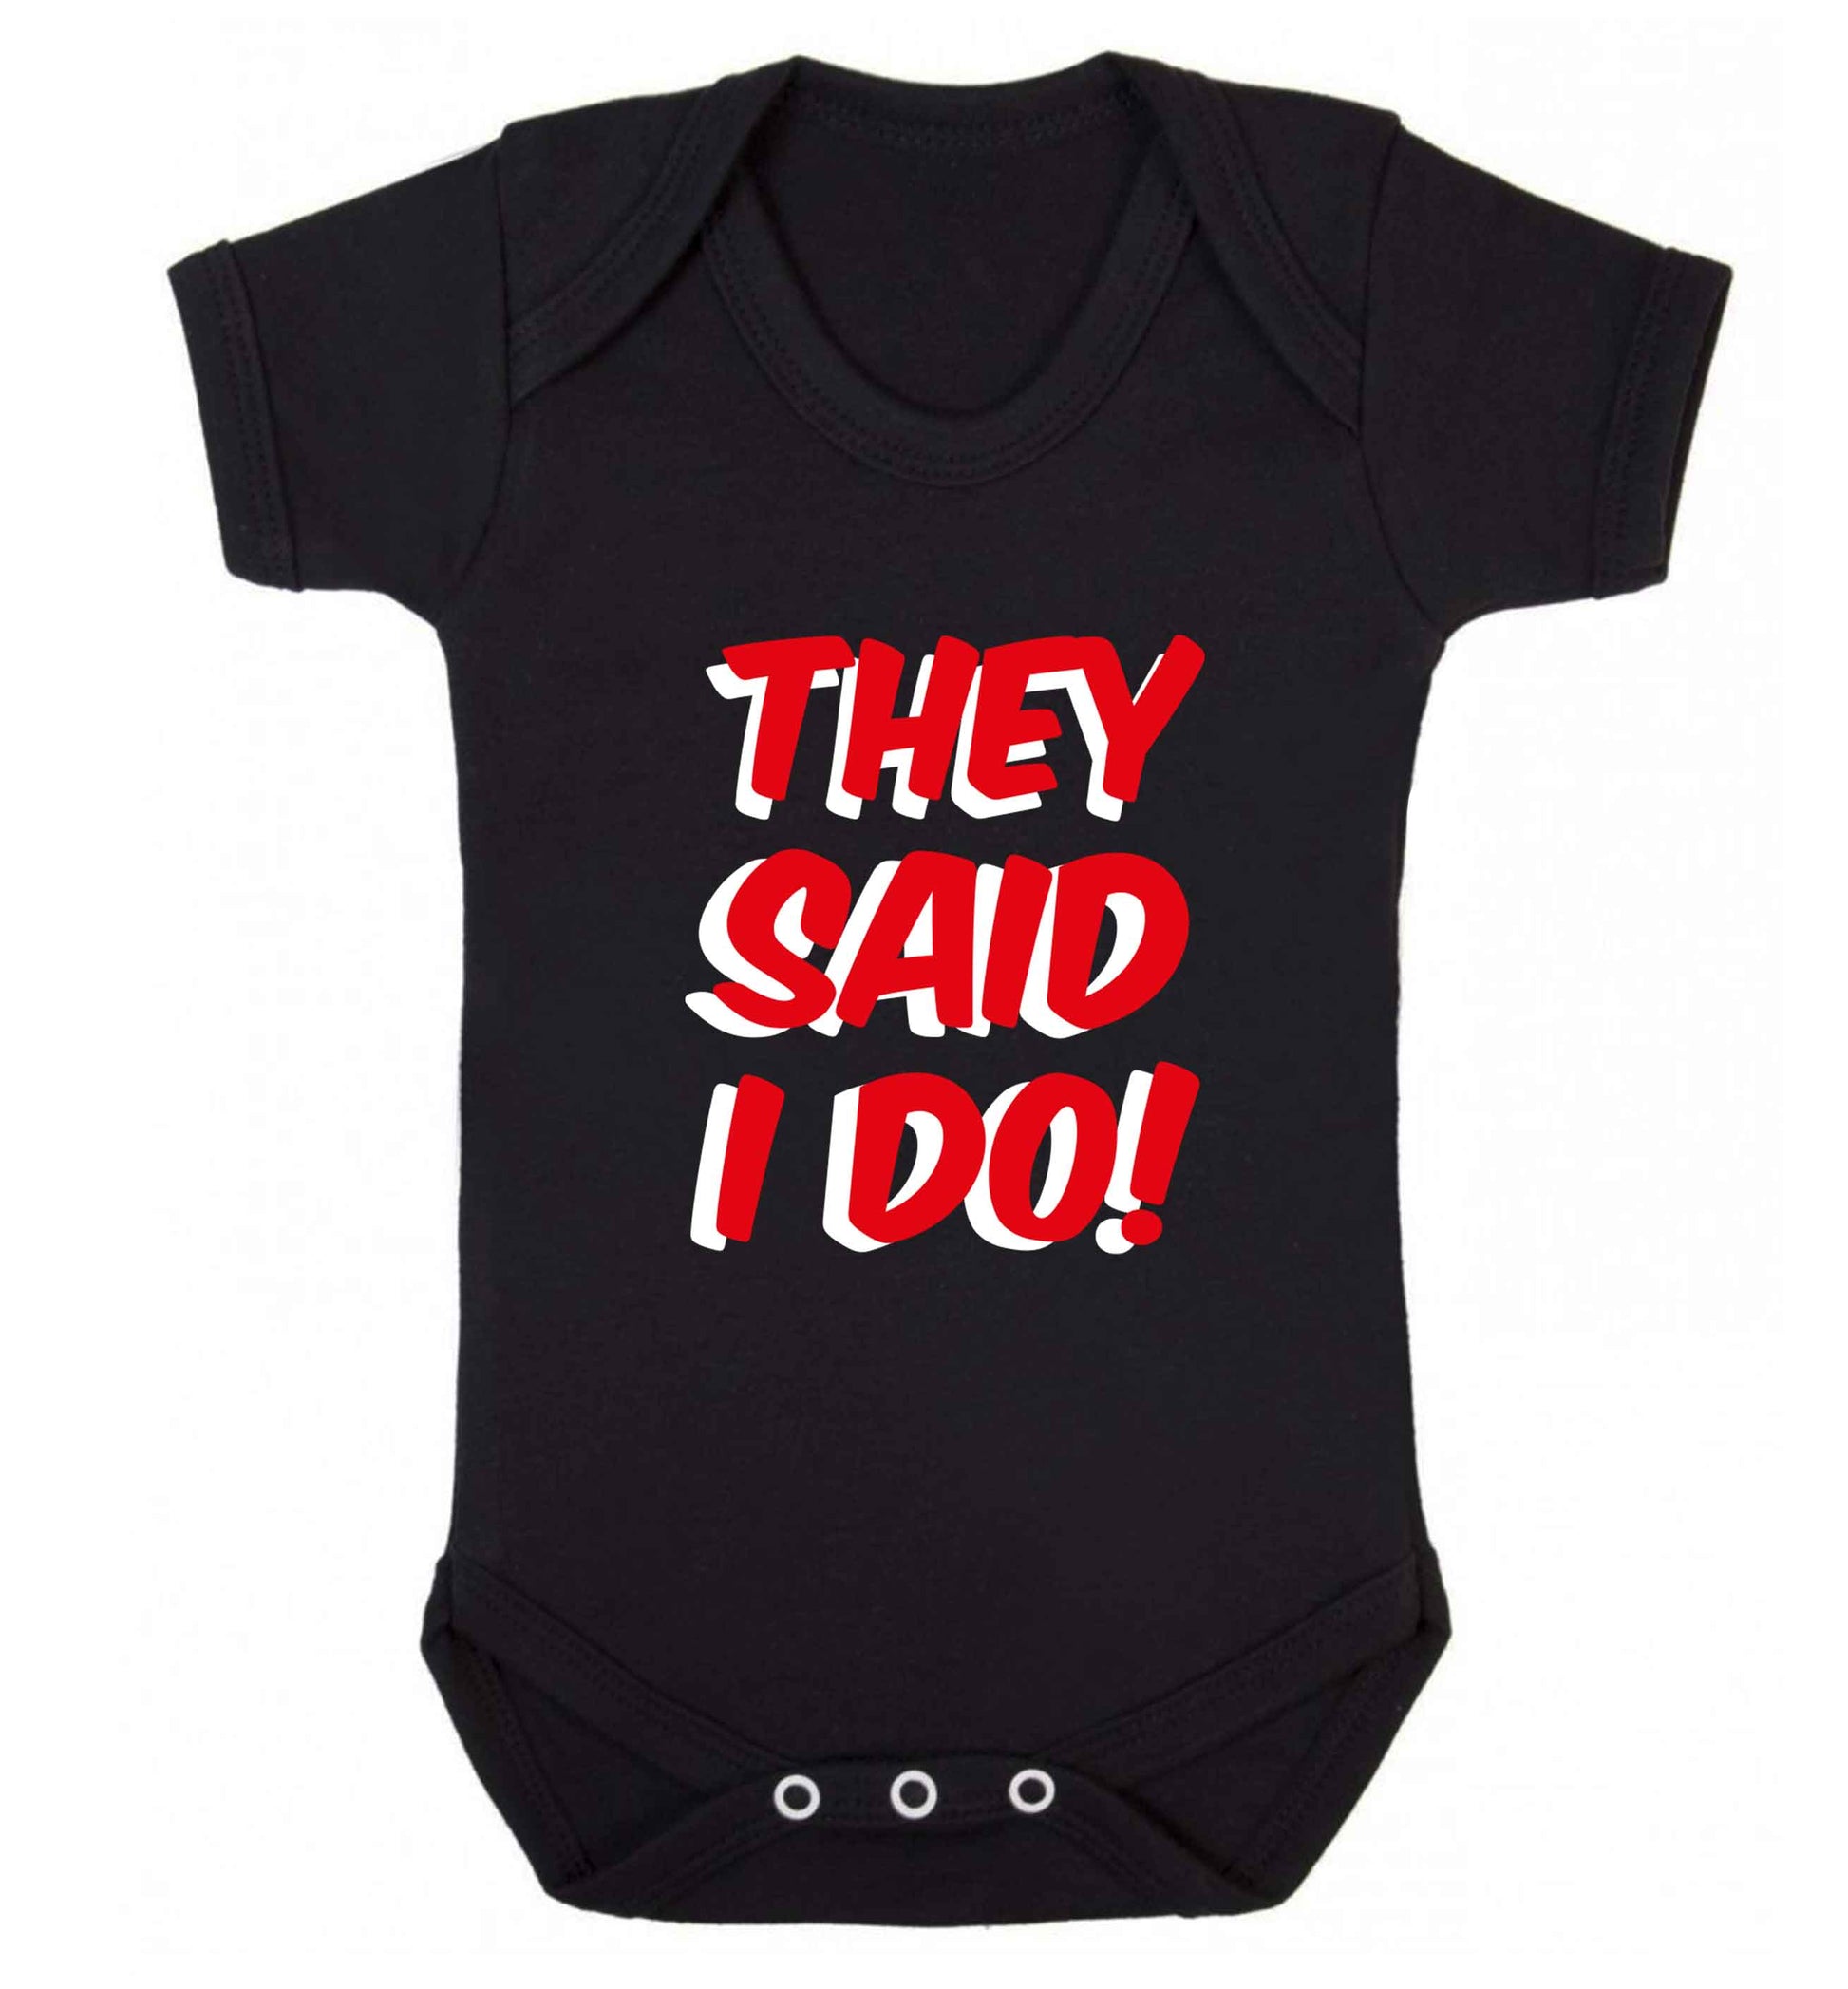 They said I do baby vest black 18-24 months